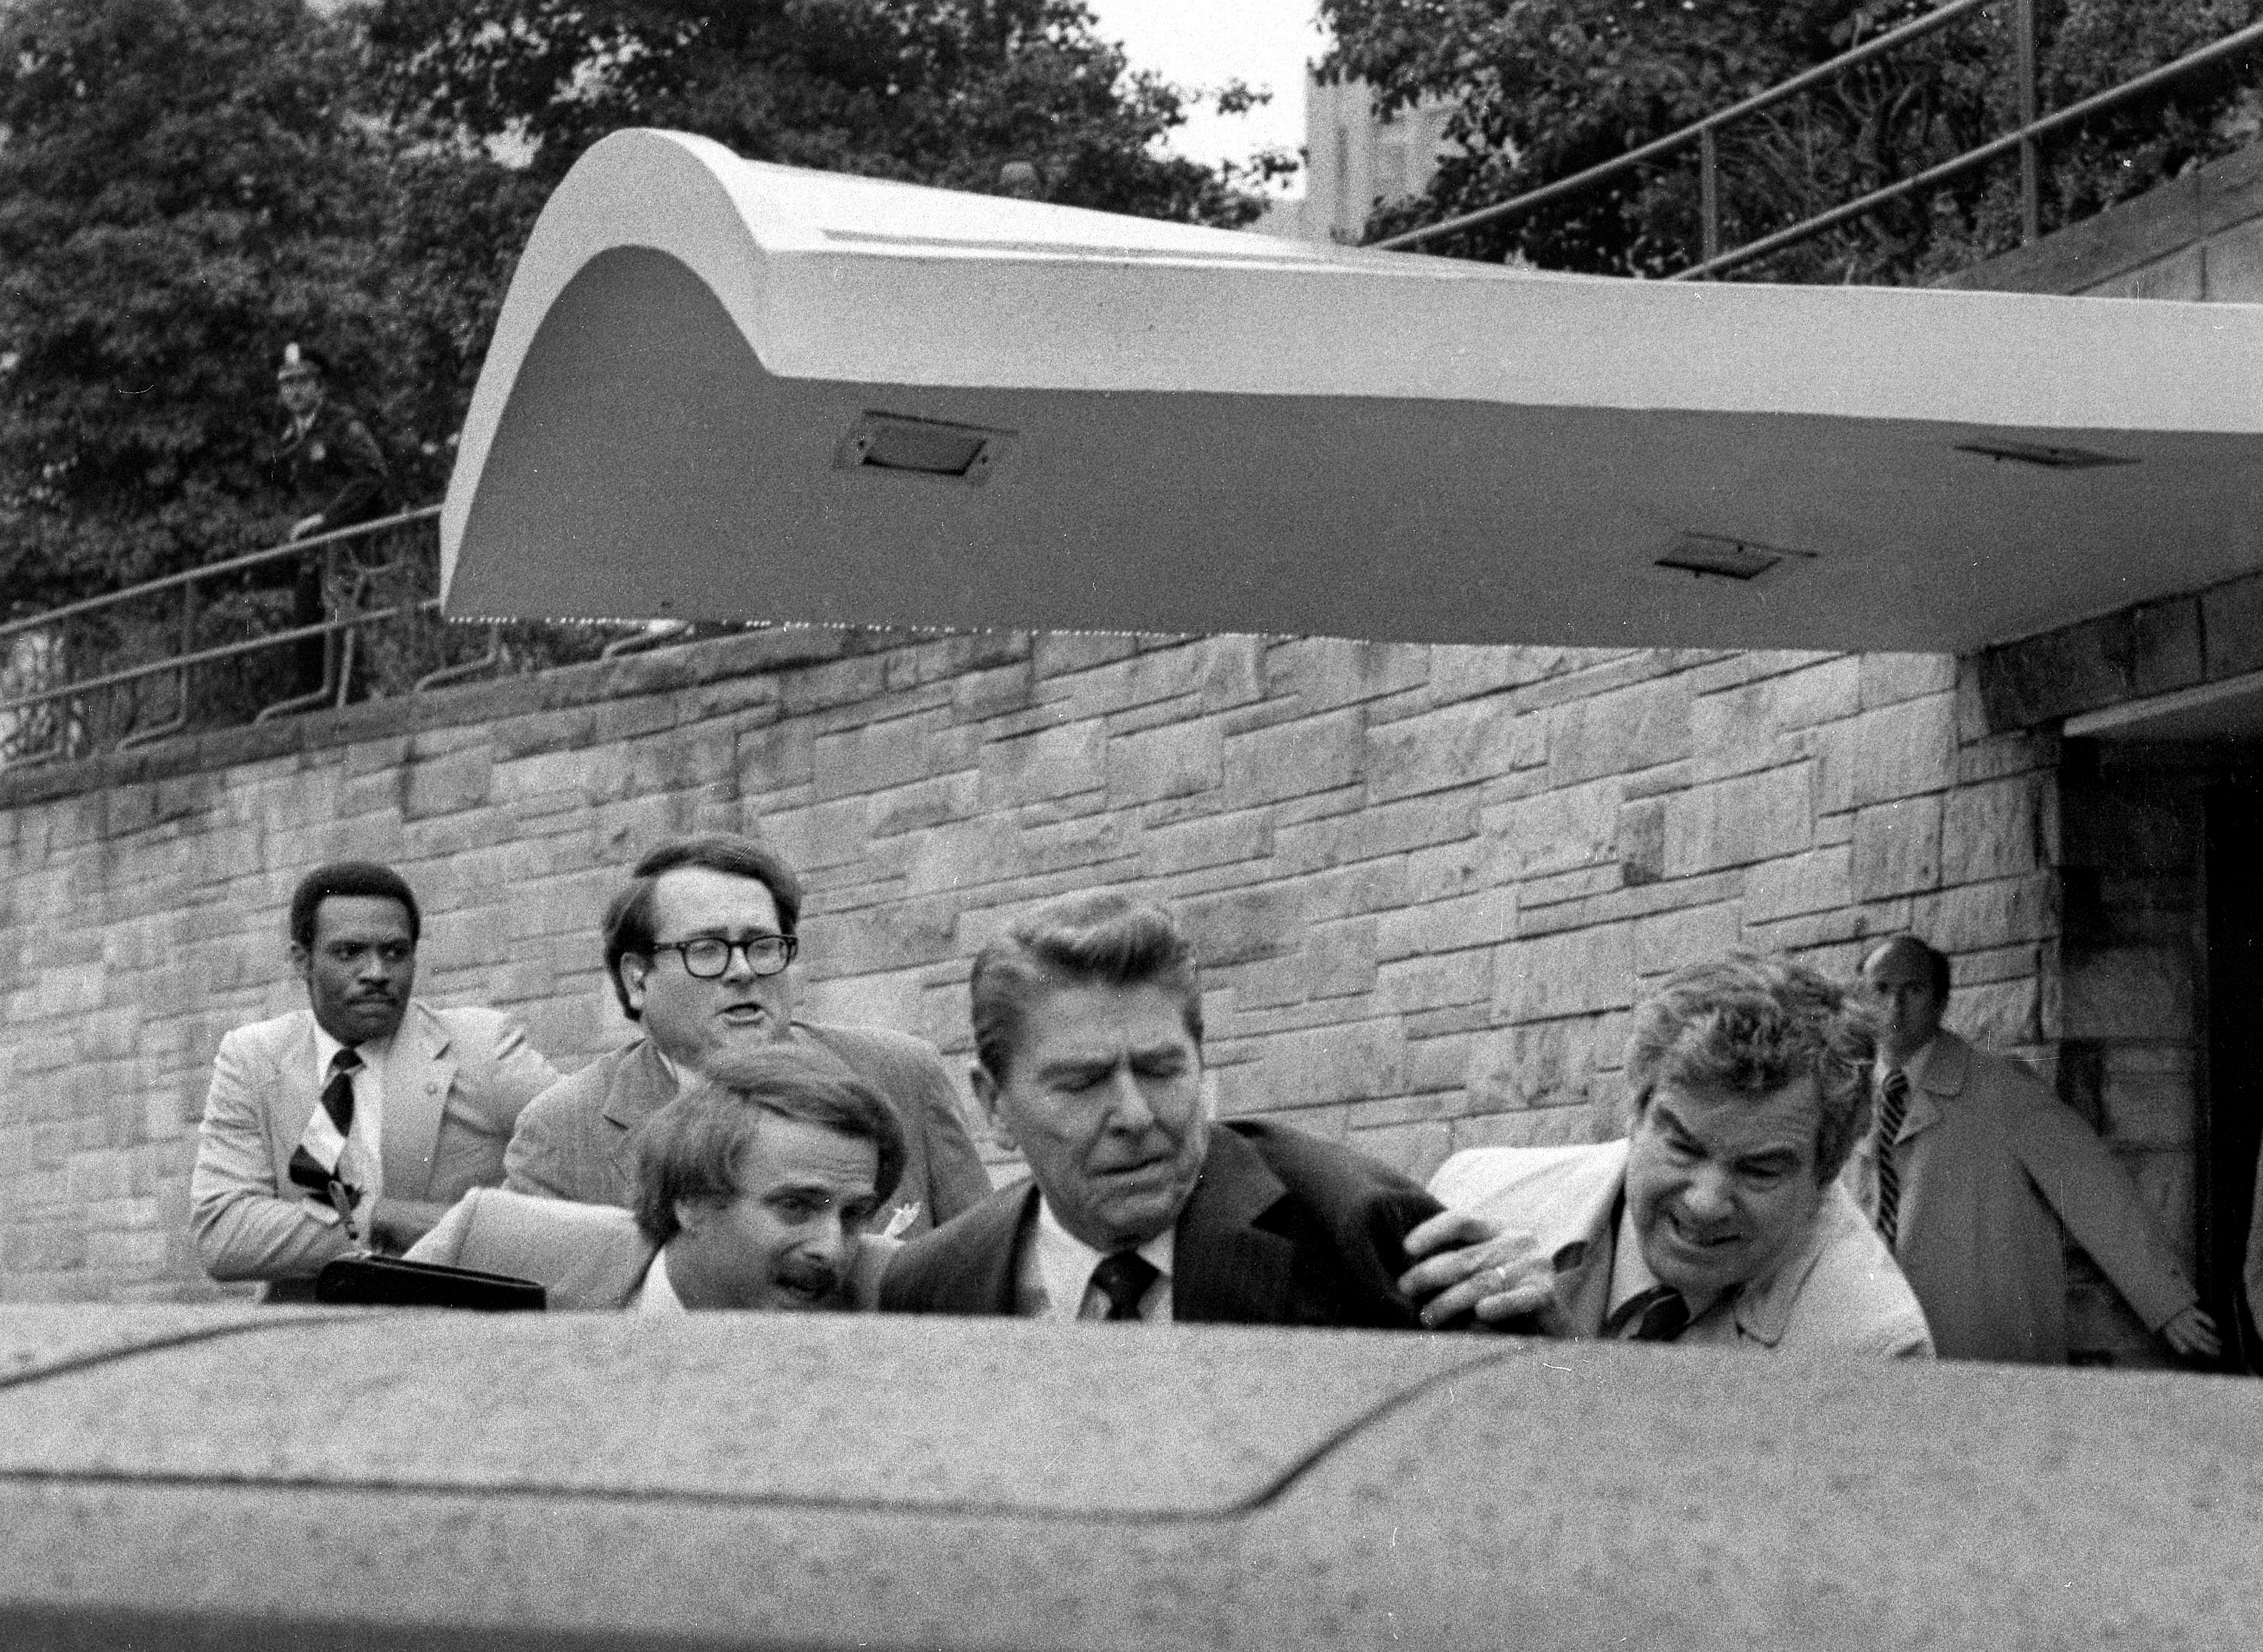 U.S. President Ronald Reagan winces and raises his left arm as he was shot by an assailant as he left a Washington hotel, Monday, March 30, 1981, after making a speech to a labor group. The President was shot in the upper left side. (AP Photo/Ron Edmonds)